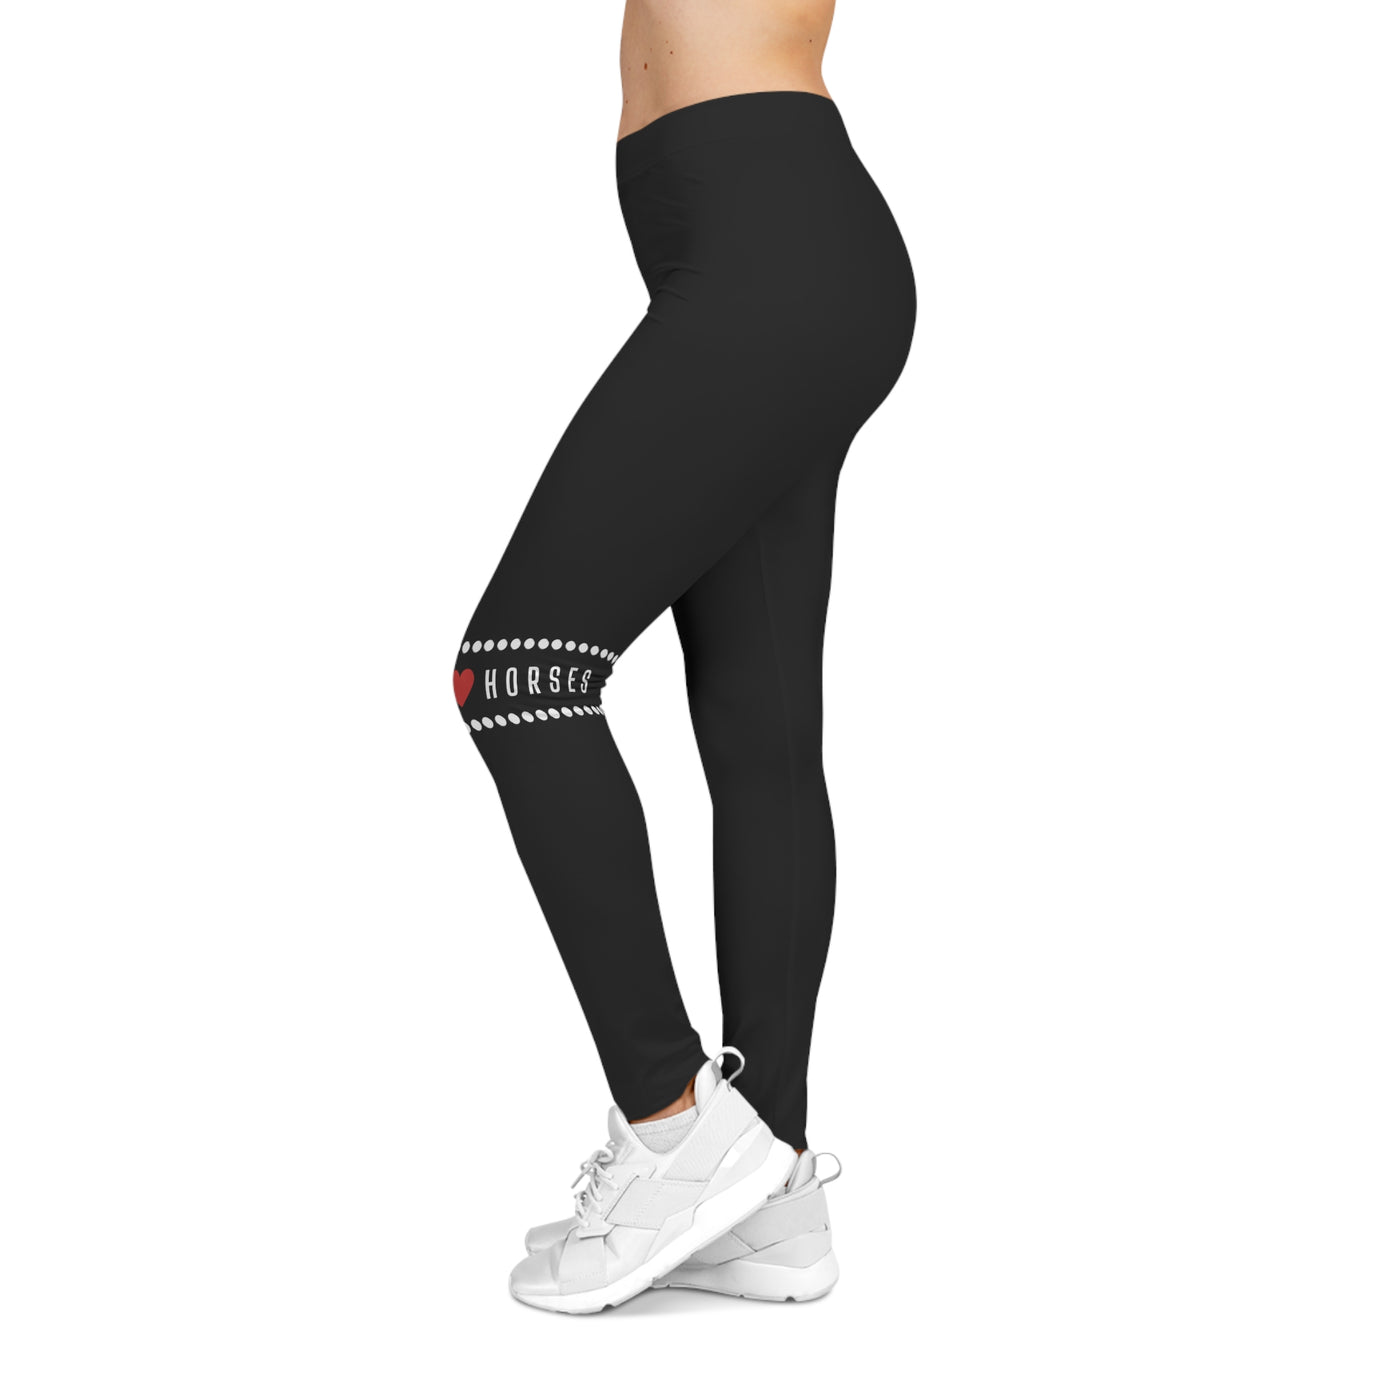 HORSE LOVE : Ride with Style! Women's Casual Leggings (AOP)